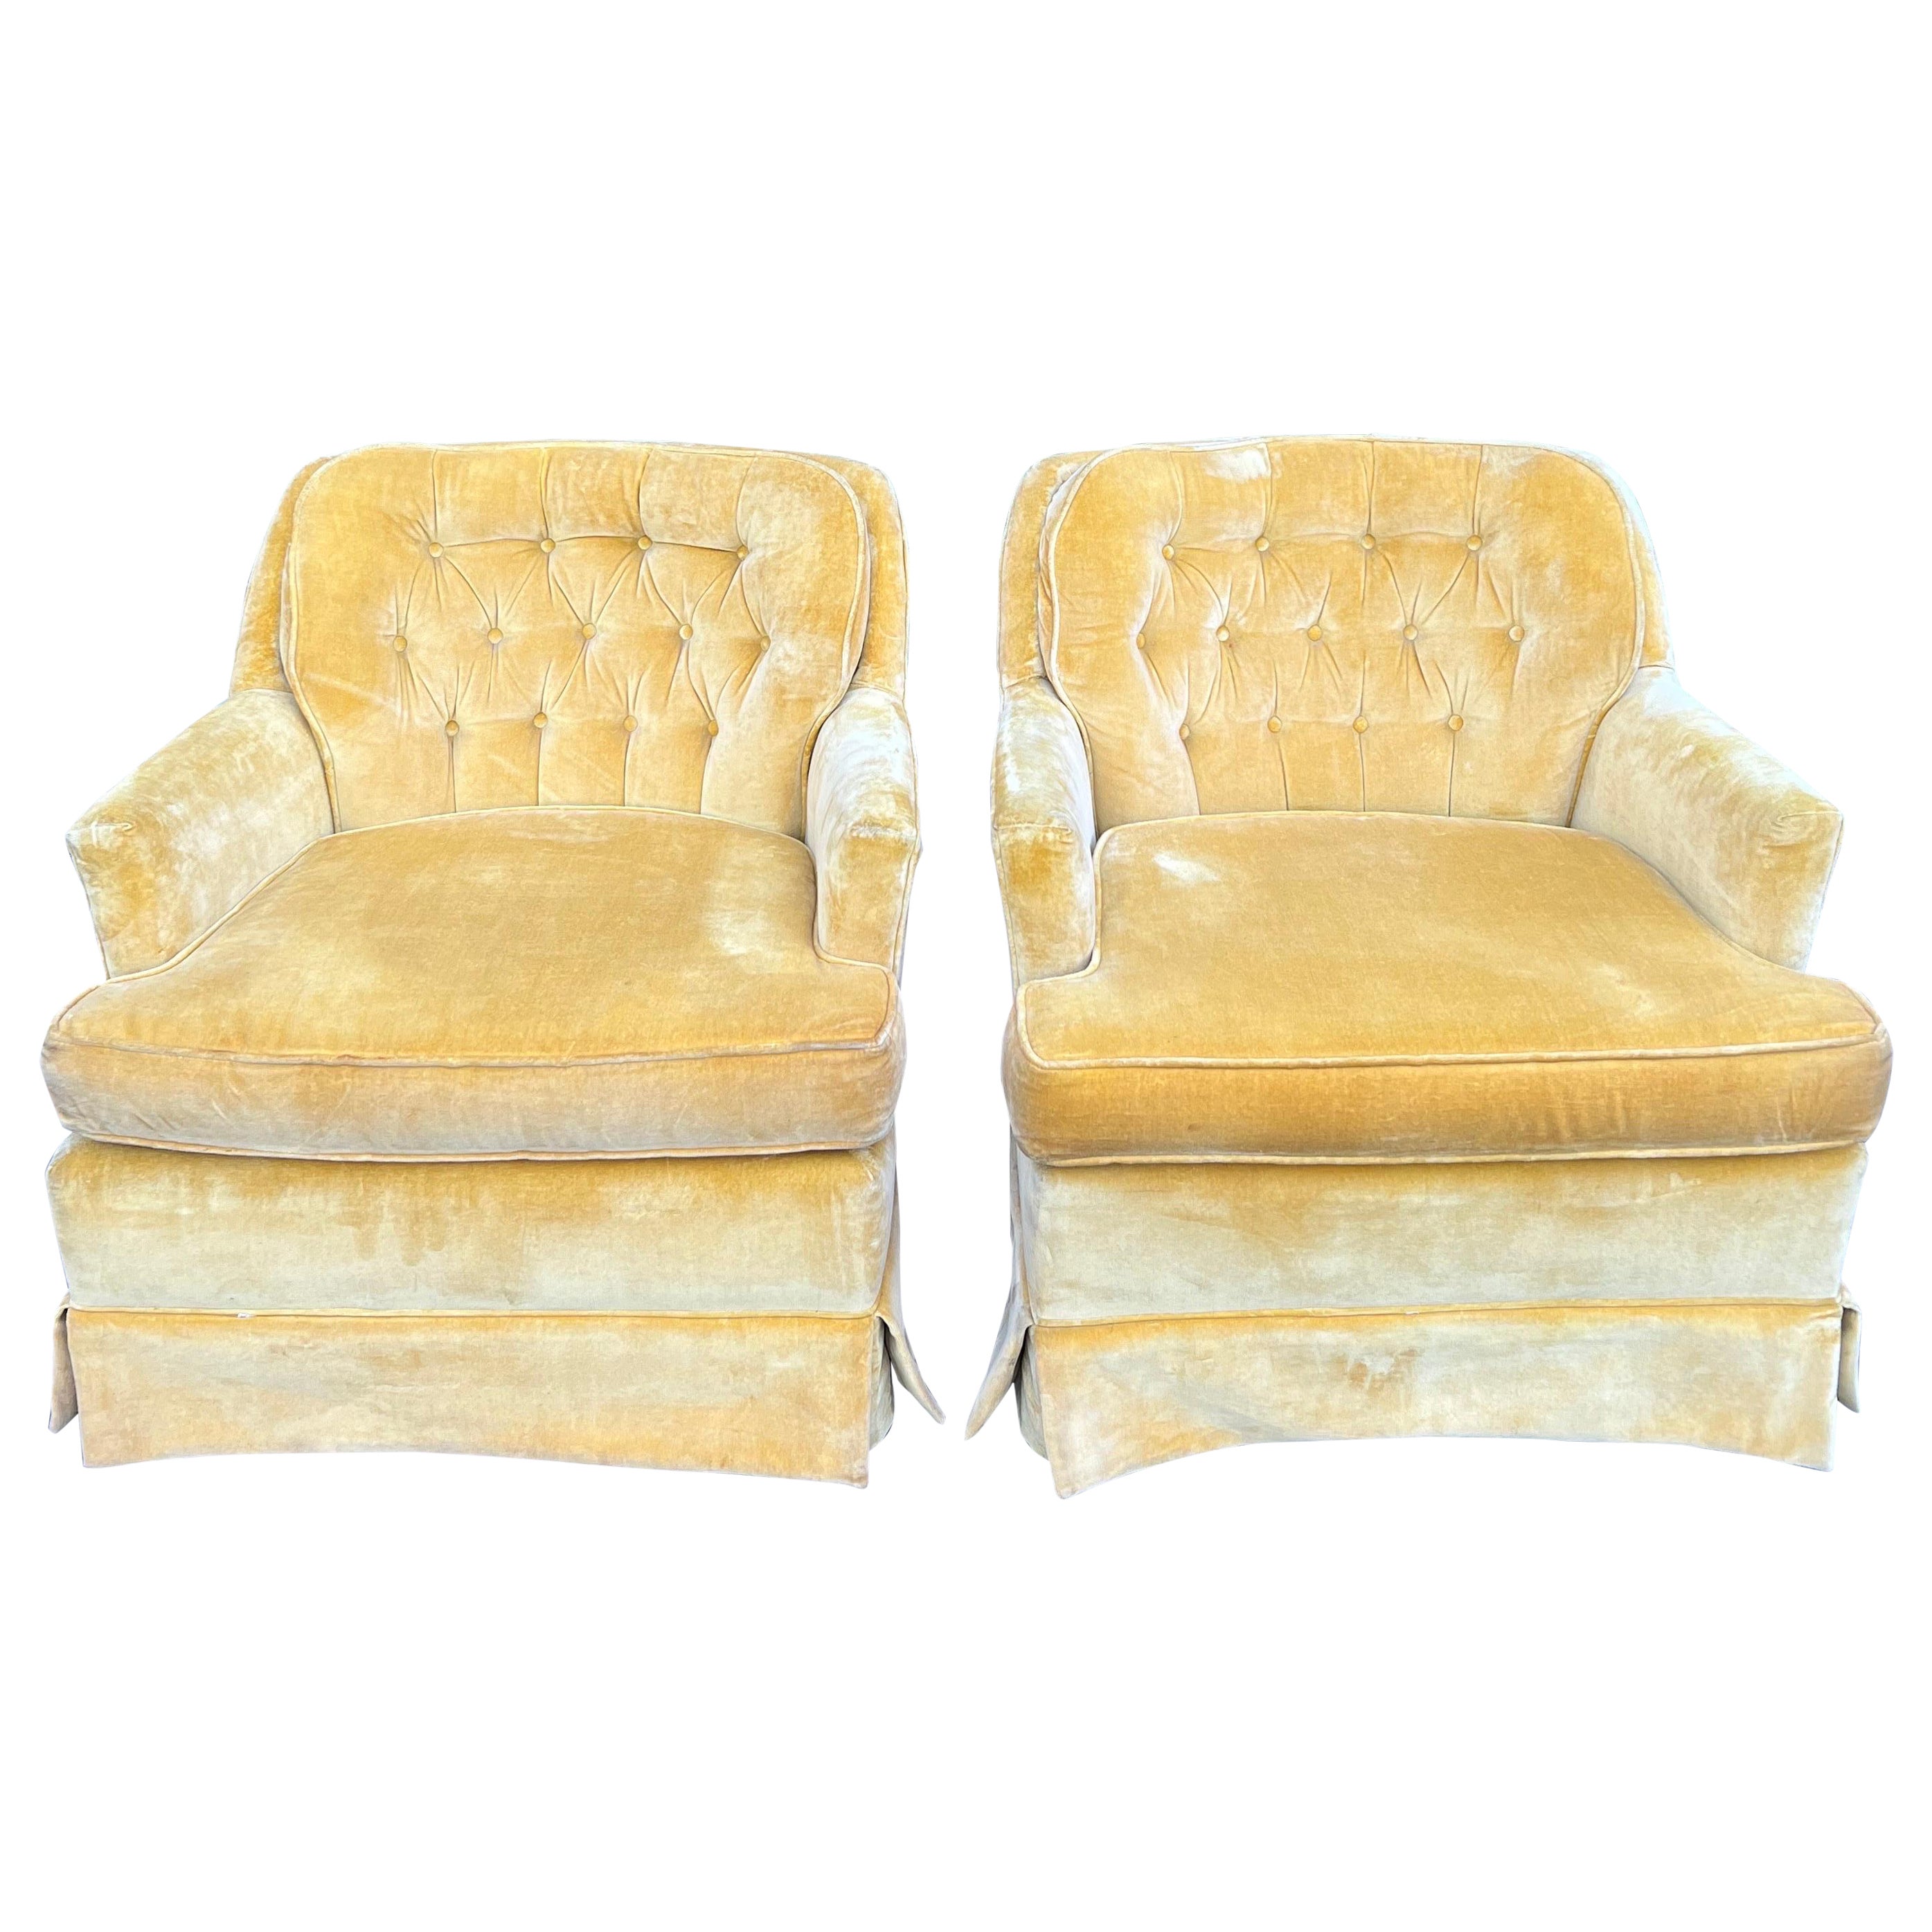 Pair of Mustard Yellow Velvet Club Chairs For Sale